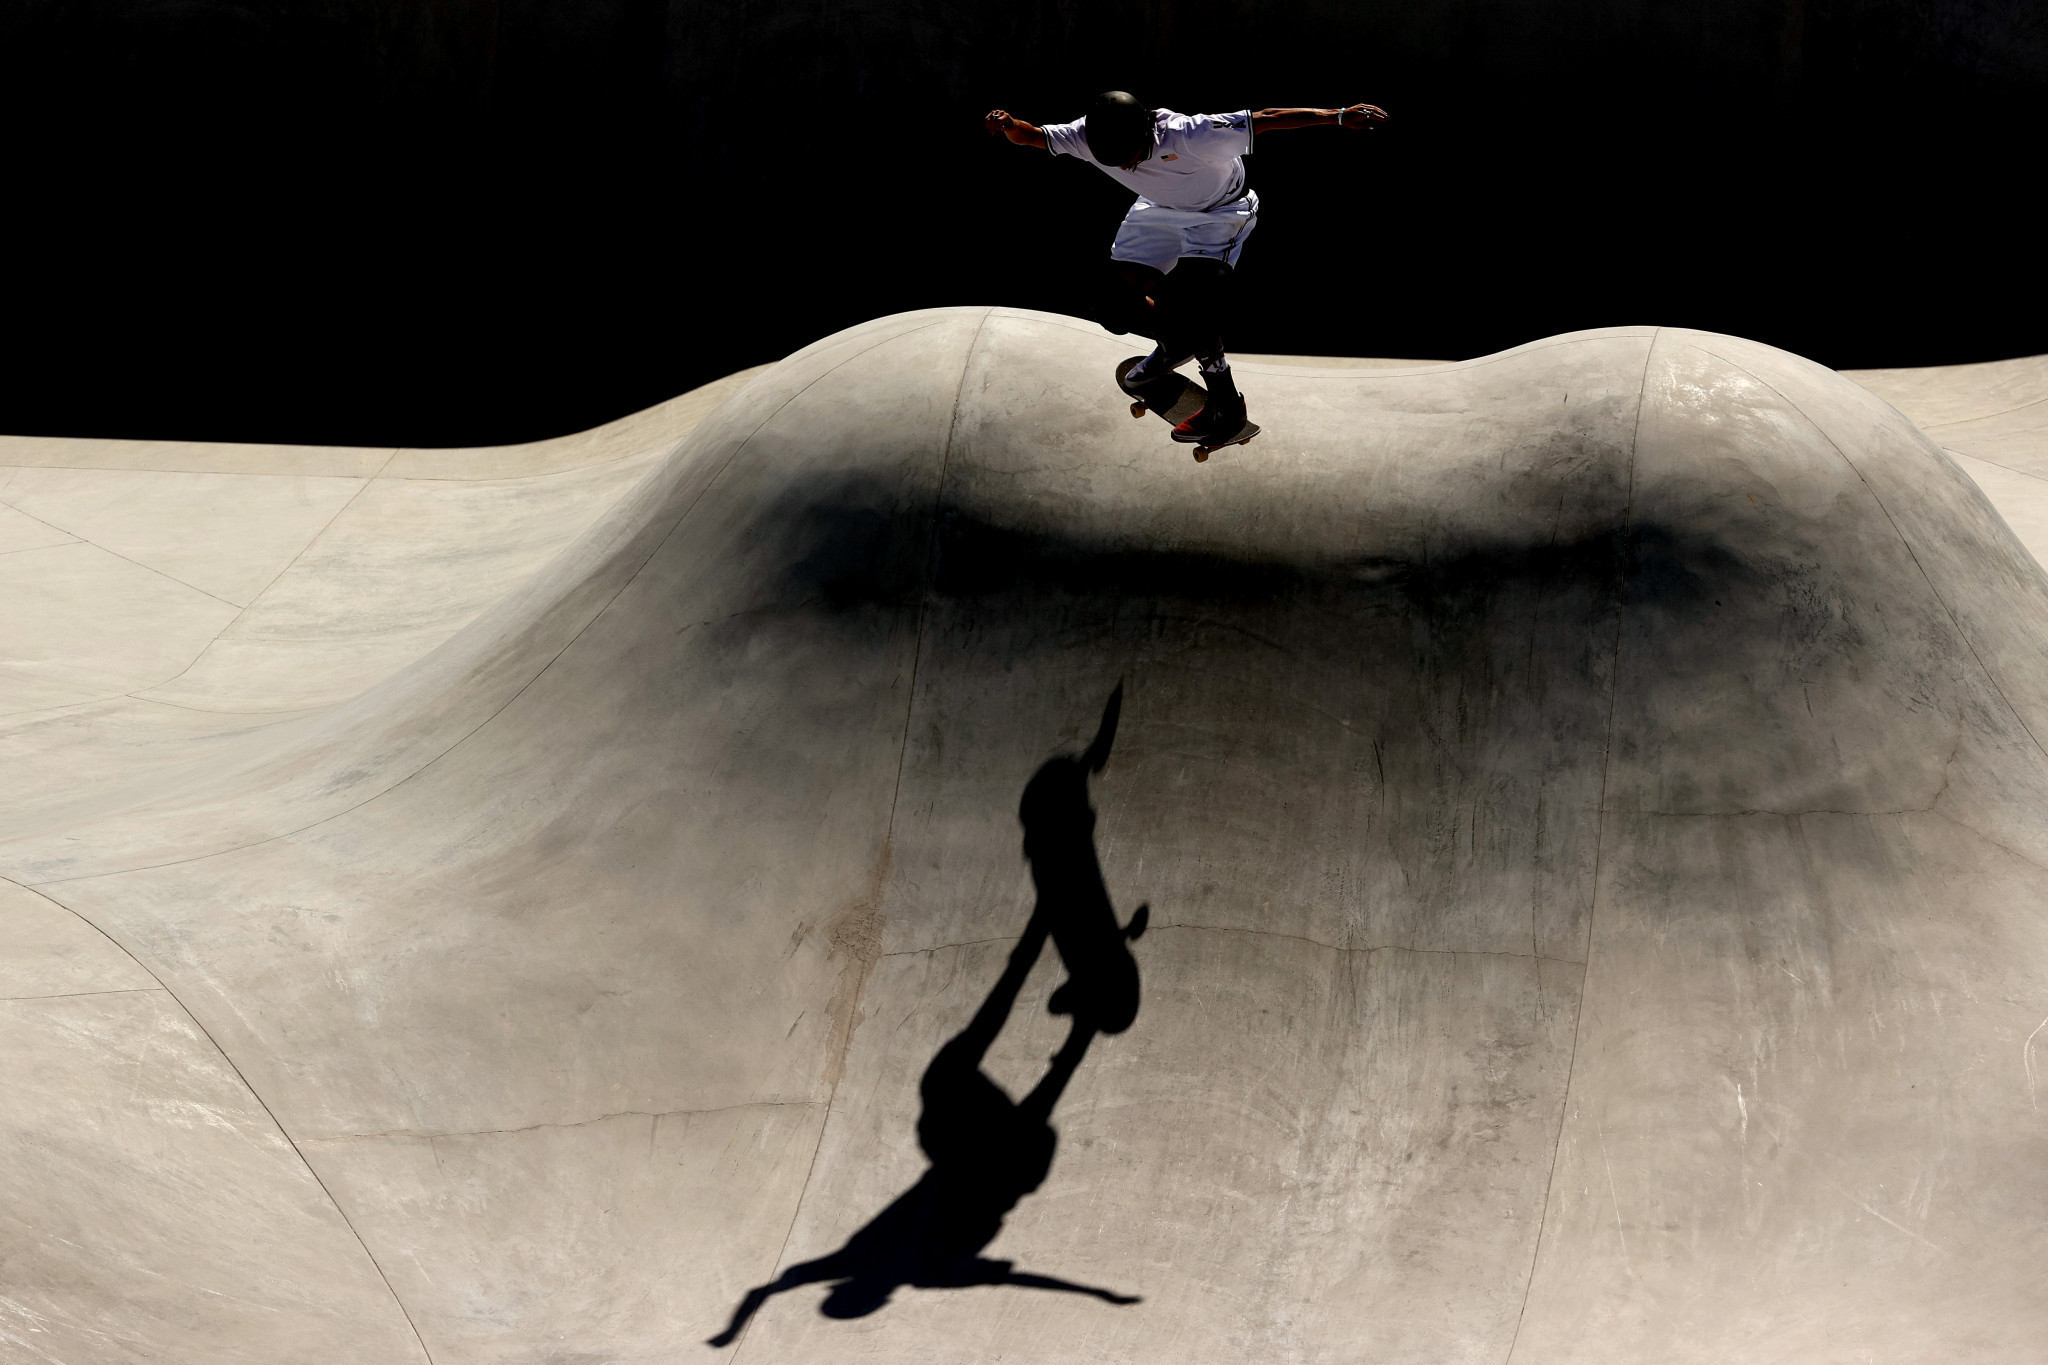 Sharjah in the United Arab Emirates will host the Park and Street Skateboarding World Championships next year which will be Paris 2024 qualifiers ©Getty Images